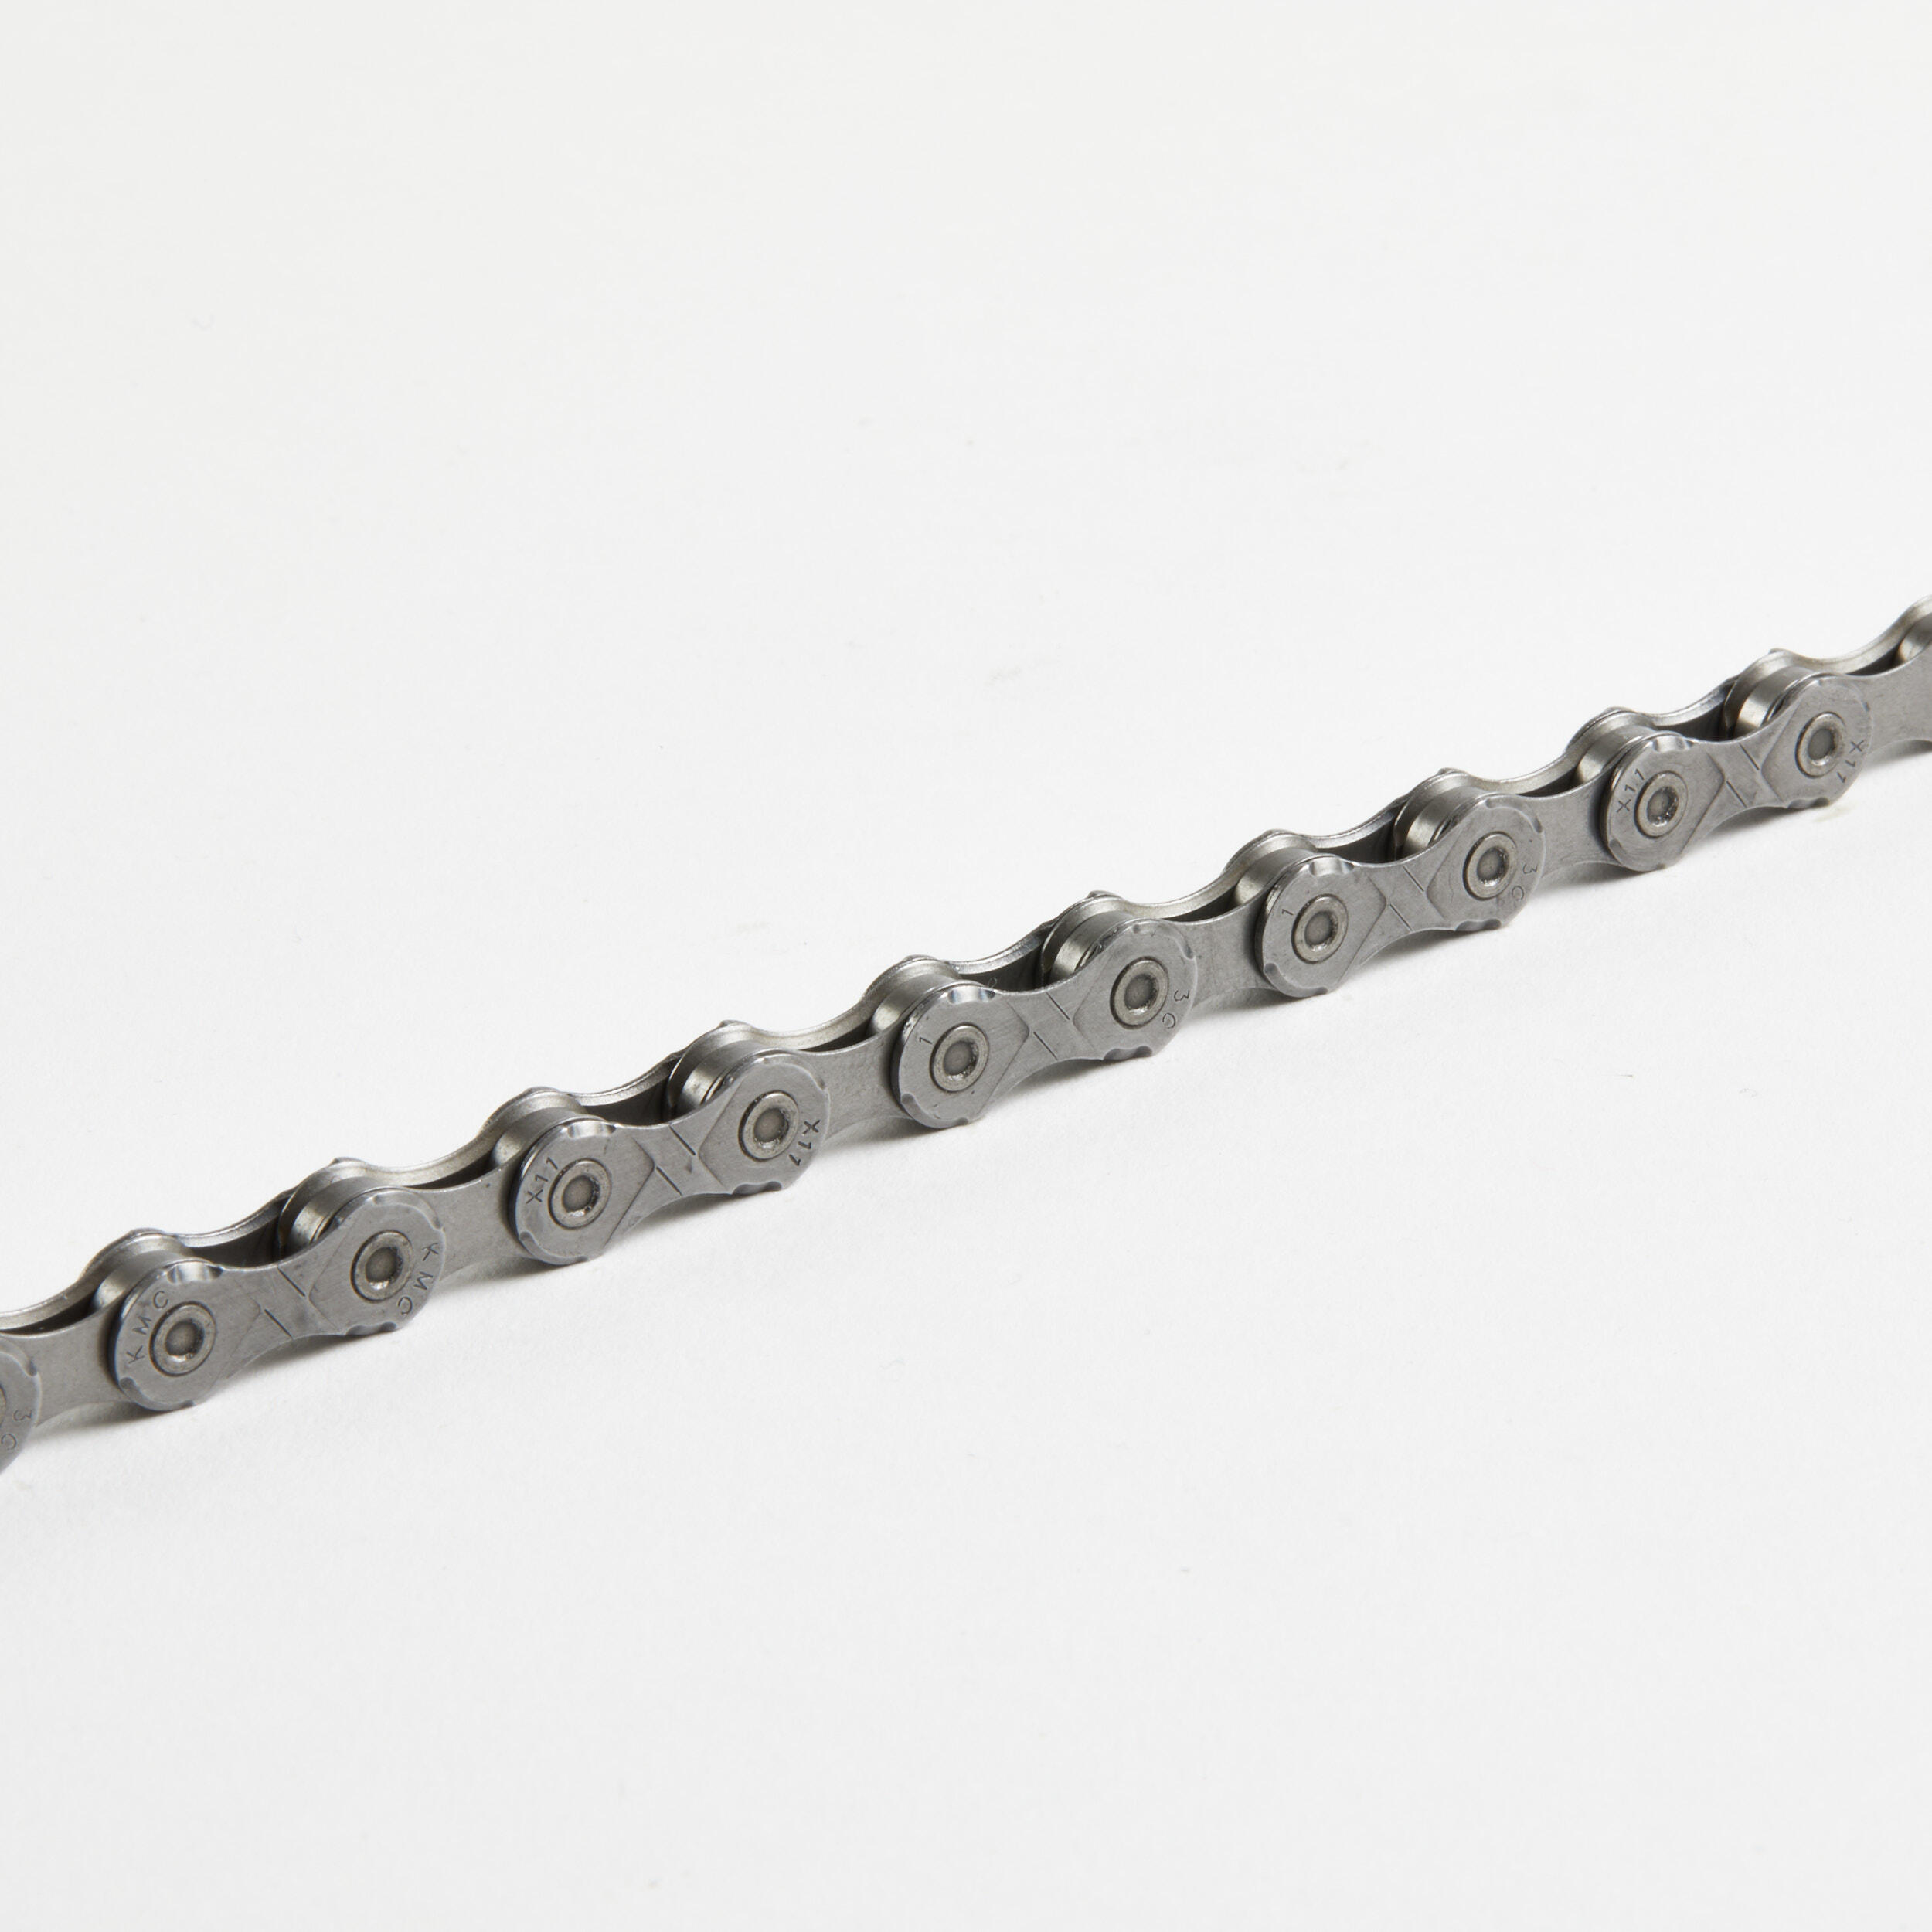 Bicycle Chain Btwin 11-speed - Silver